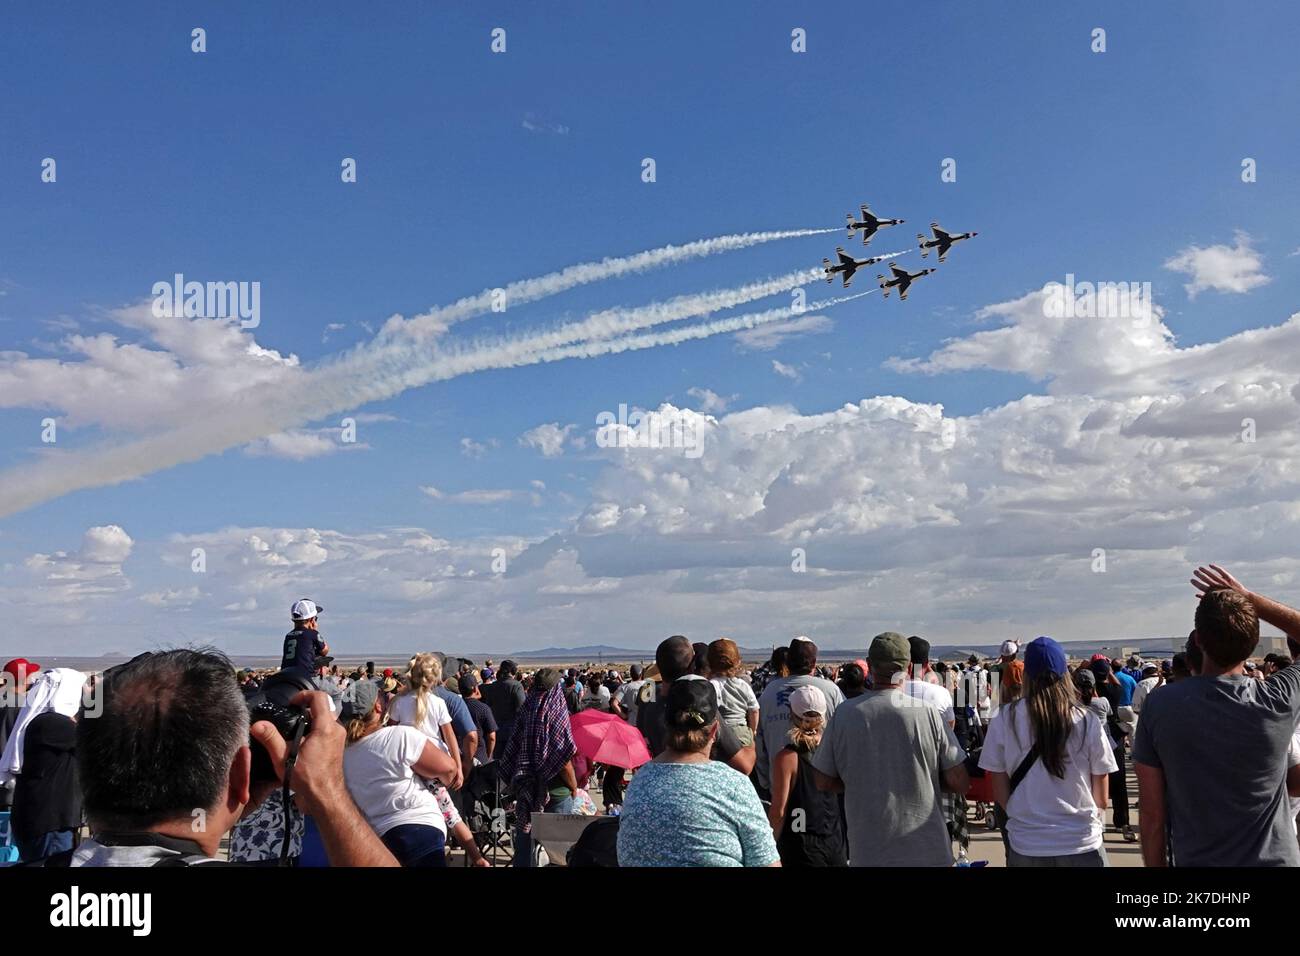 Edwards AFB, California / USA - Oct. 15, 2022: The United States Air Force (USAF) Thunderbirds air demonstration squadron performs for spectators. Stock Photo